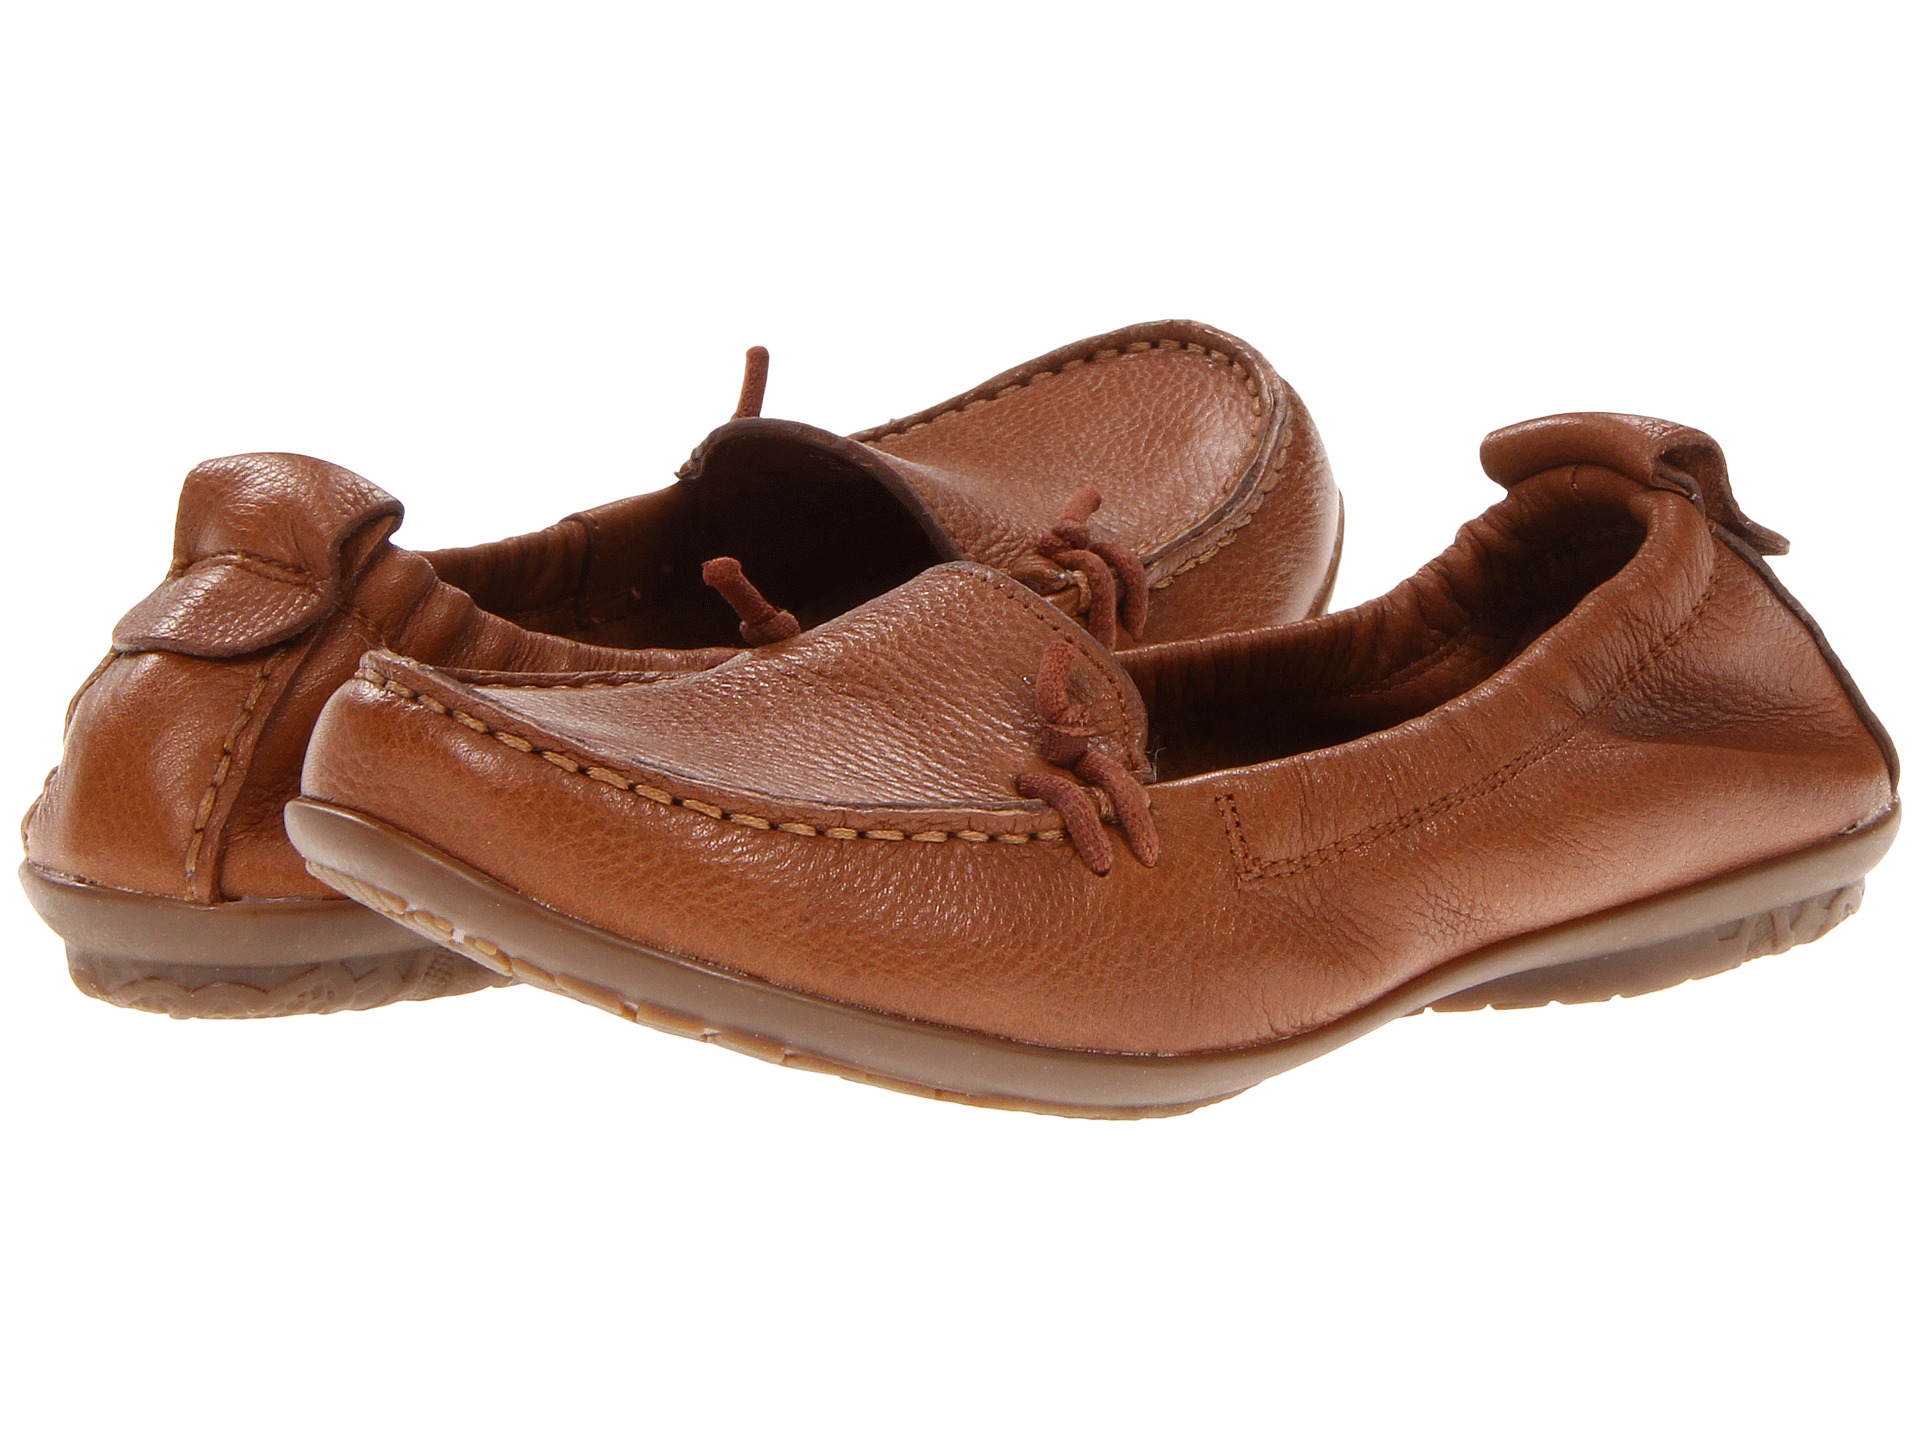 Hush Puppies Ceil Slip On, Shoes | Shipped Free at Zappos